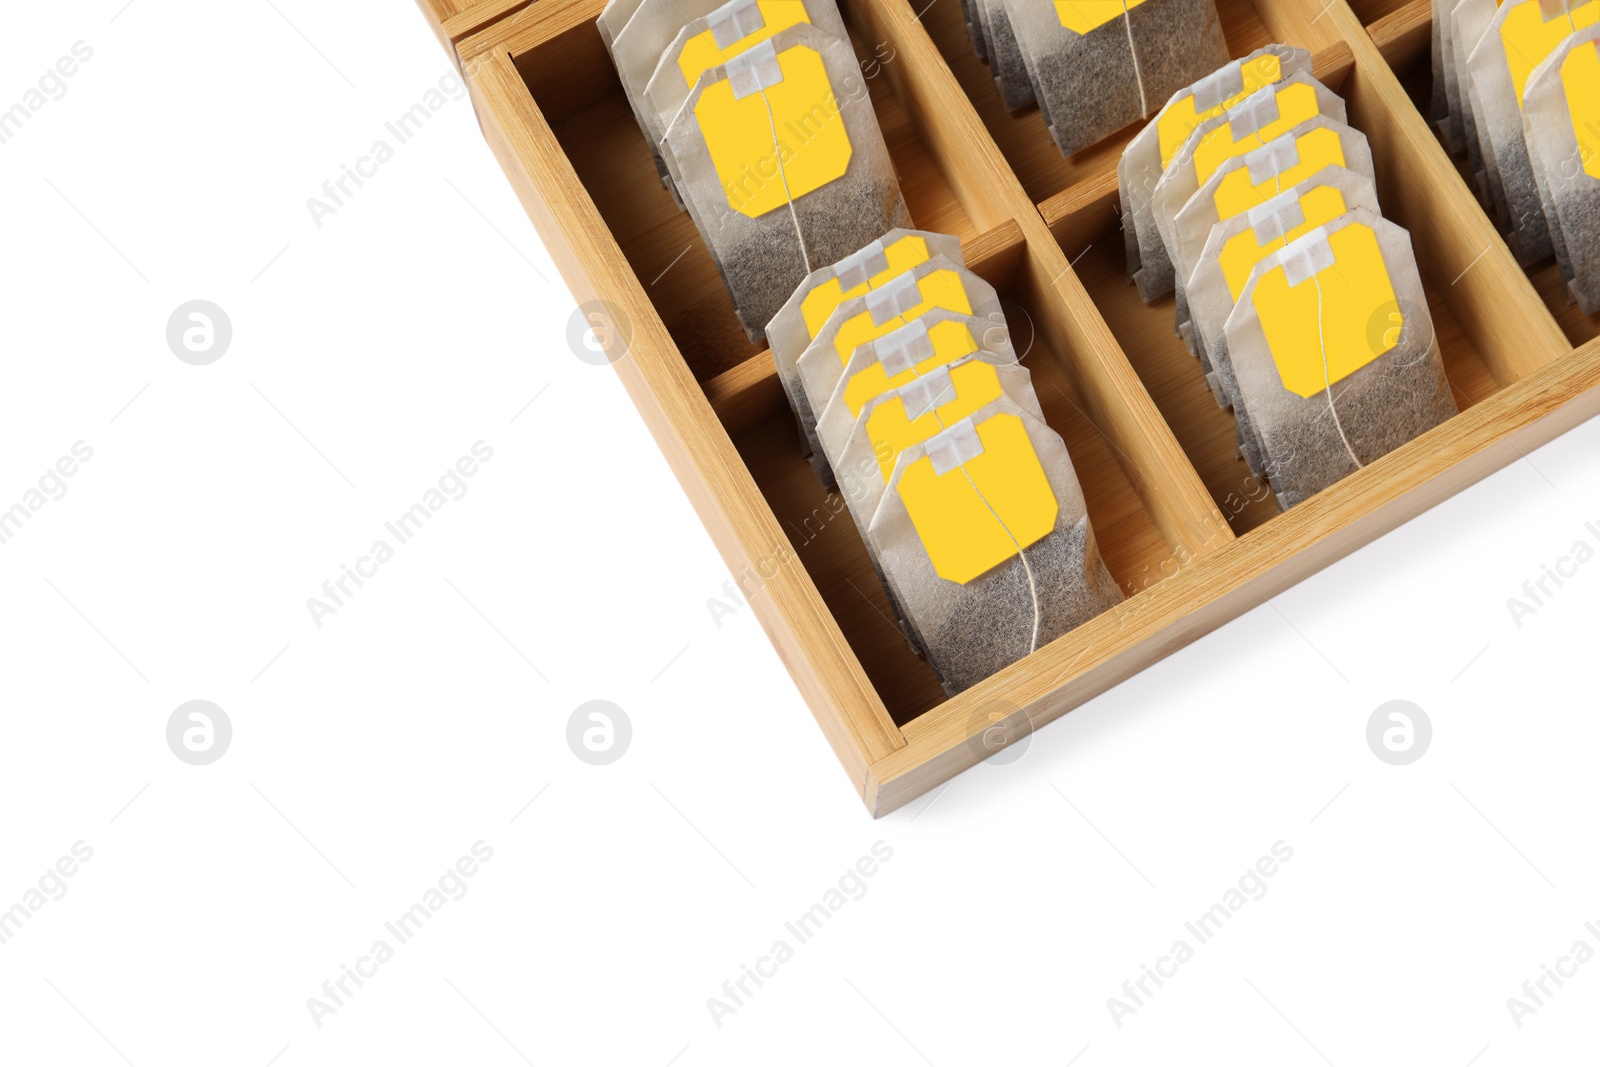 Photo of Paper tea bags with tags in wooden box on white background, above view